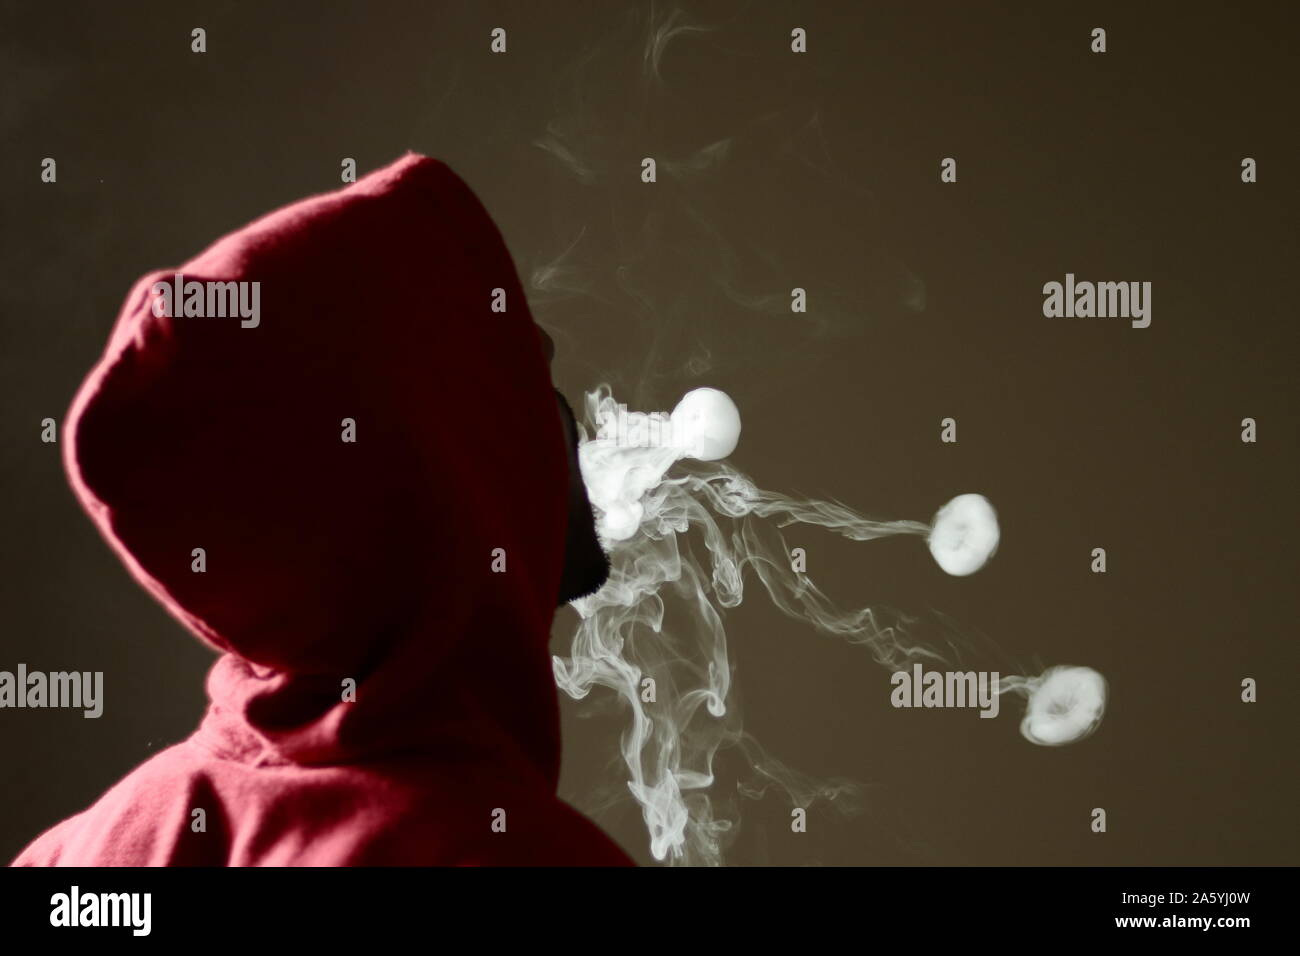 Young male in red hoodie vaping smoking, blows 3 smoke rings, isolated rear view Stock Photo